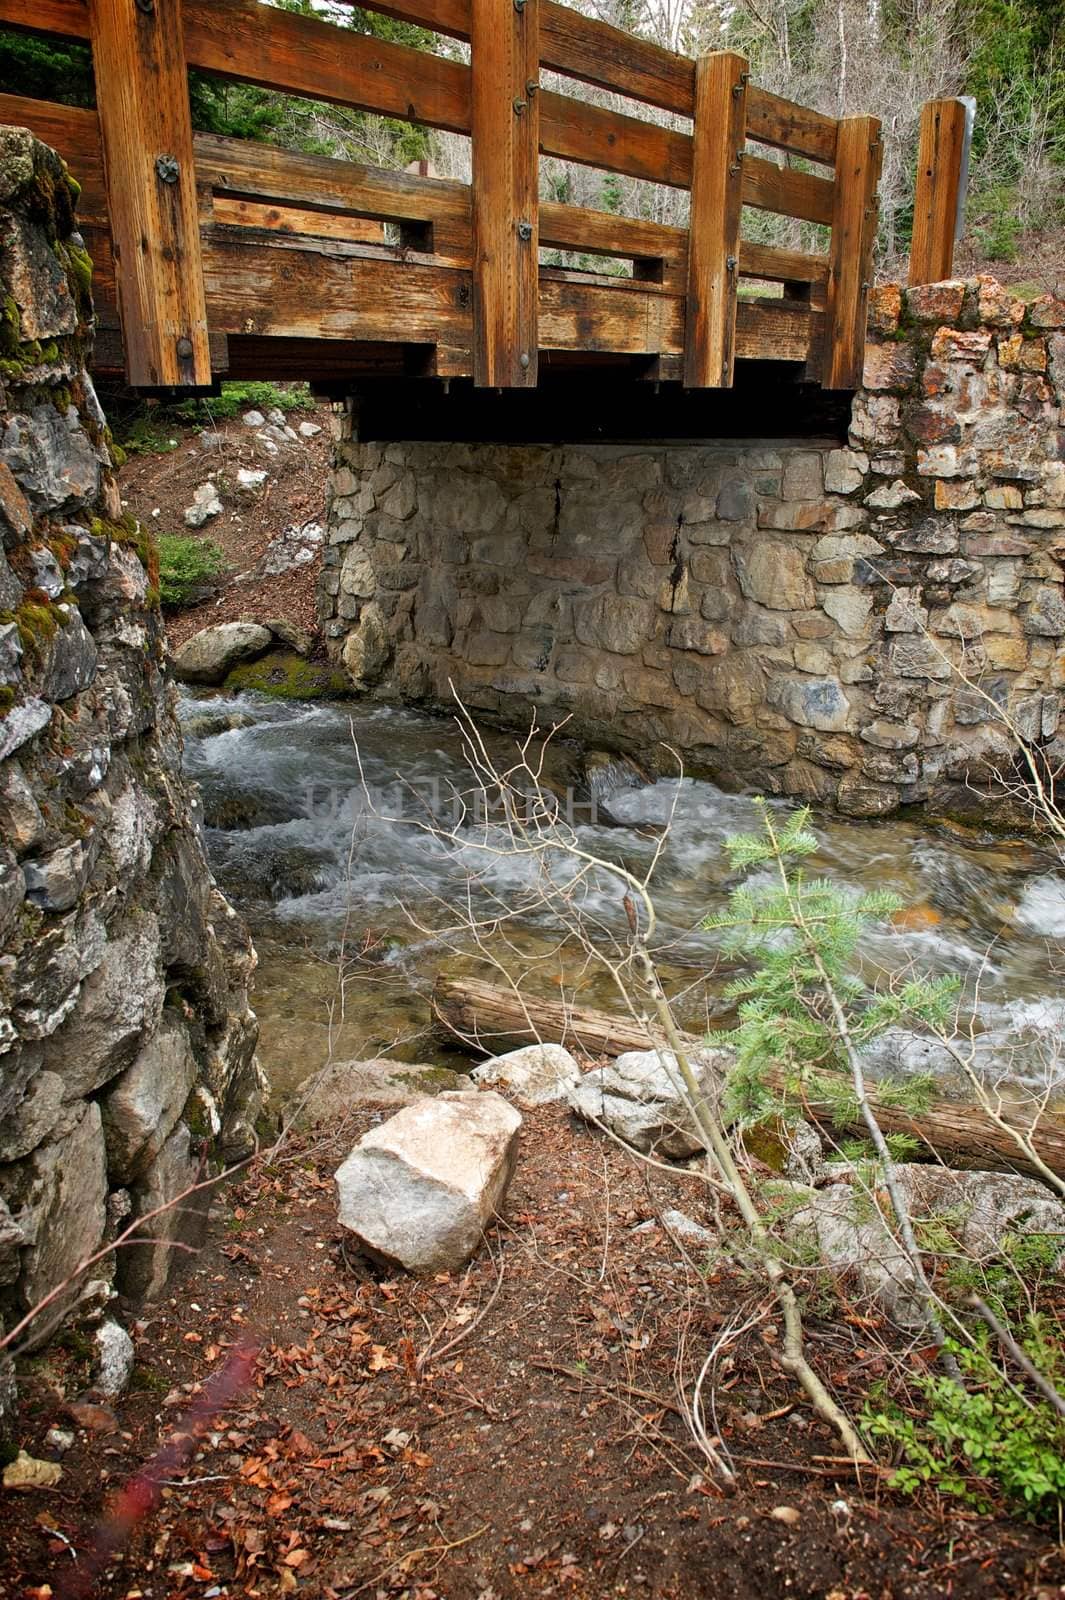 A weathered and worn wooden bridge stretches between two stone walls with a running stream